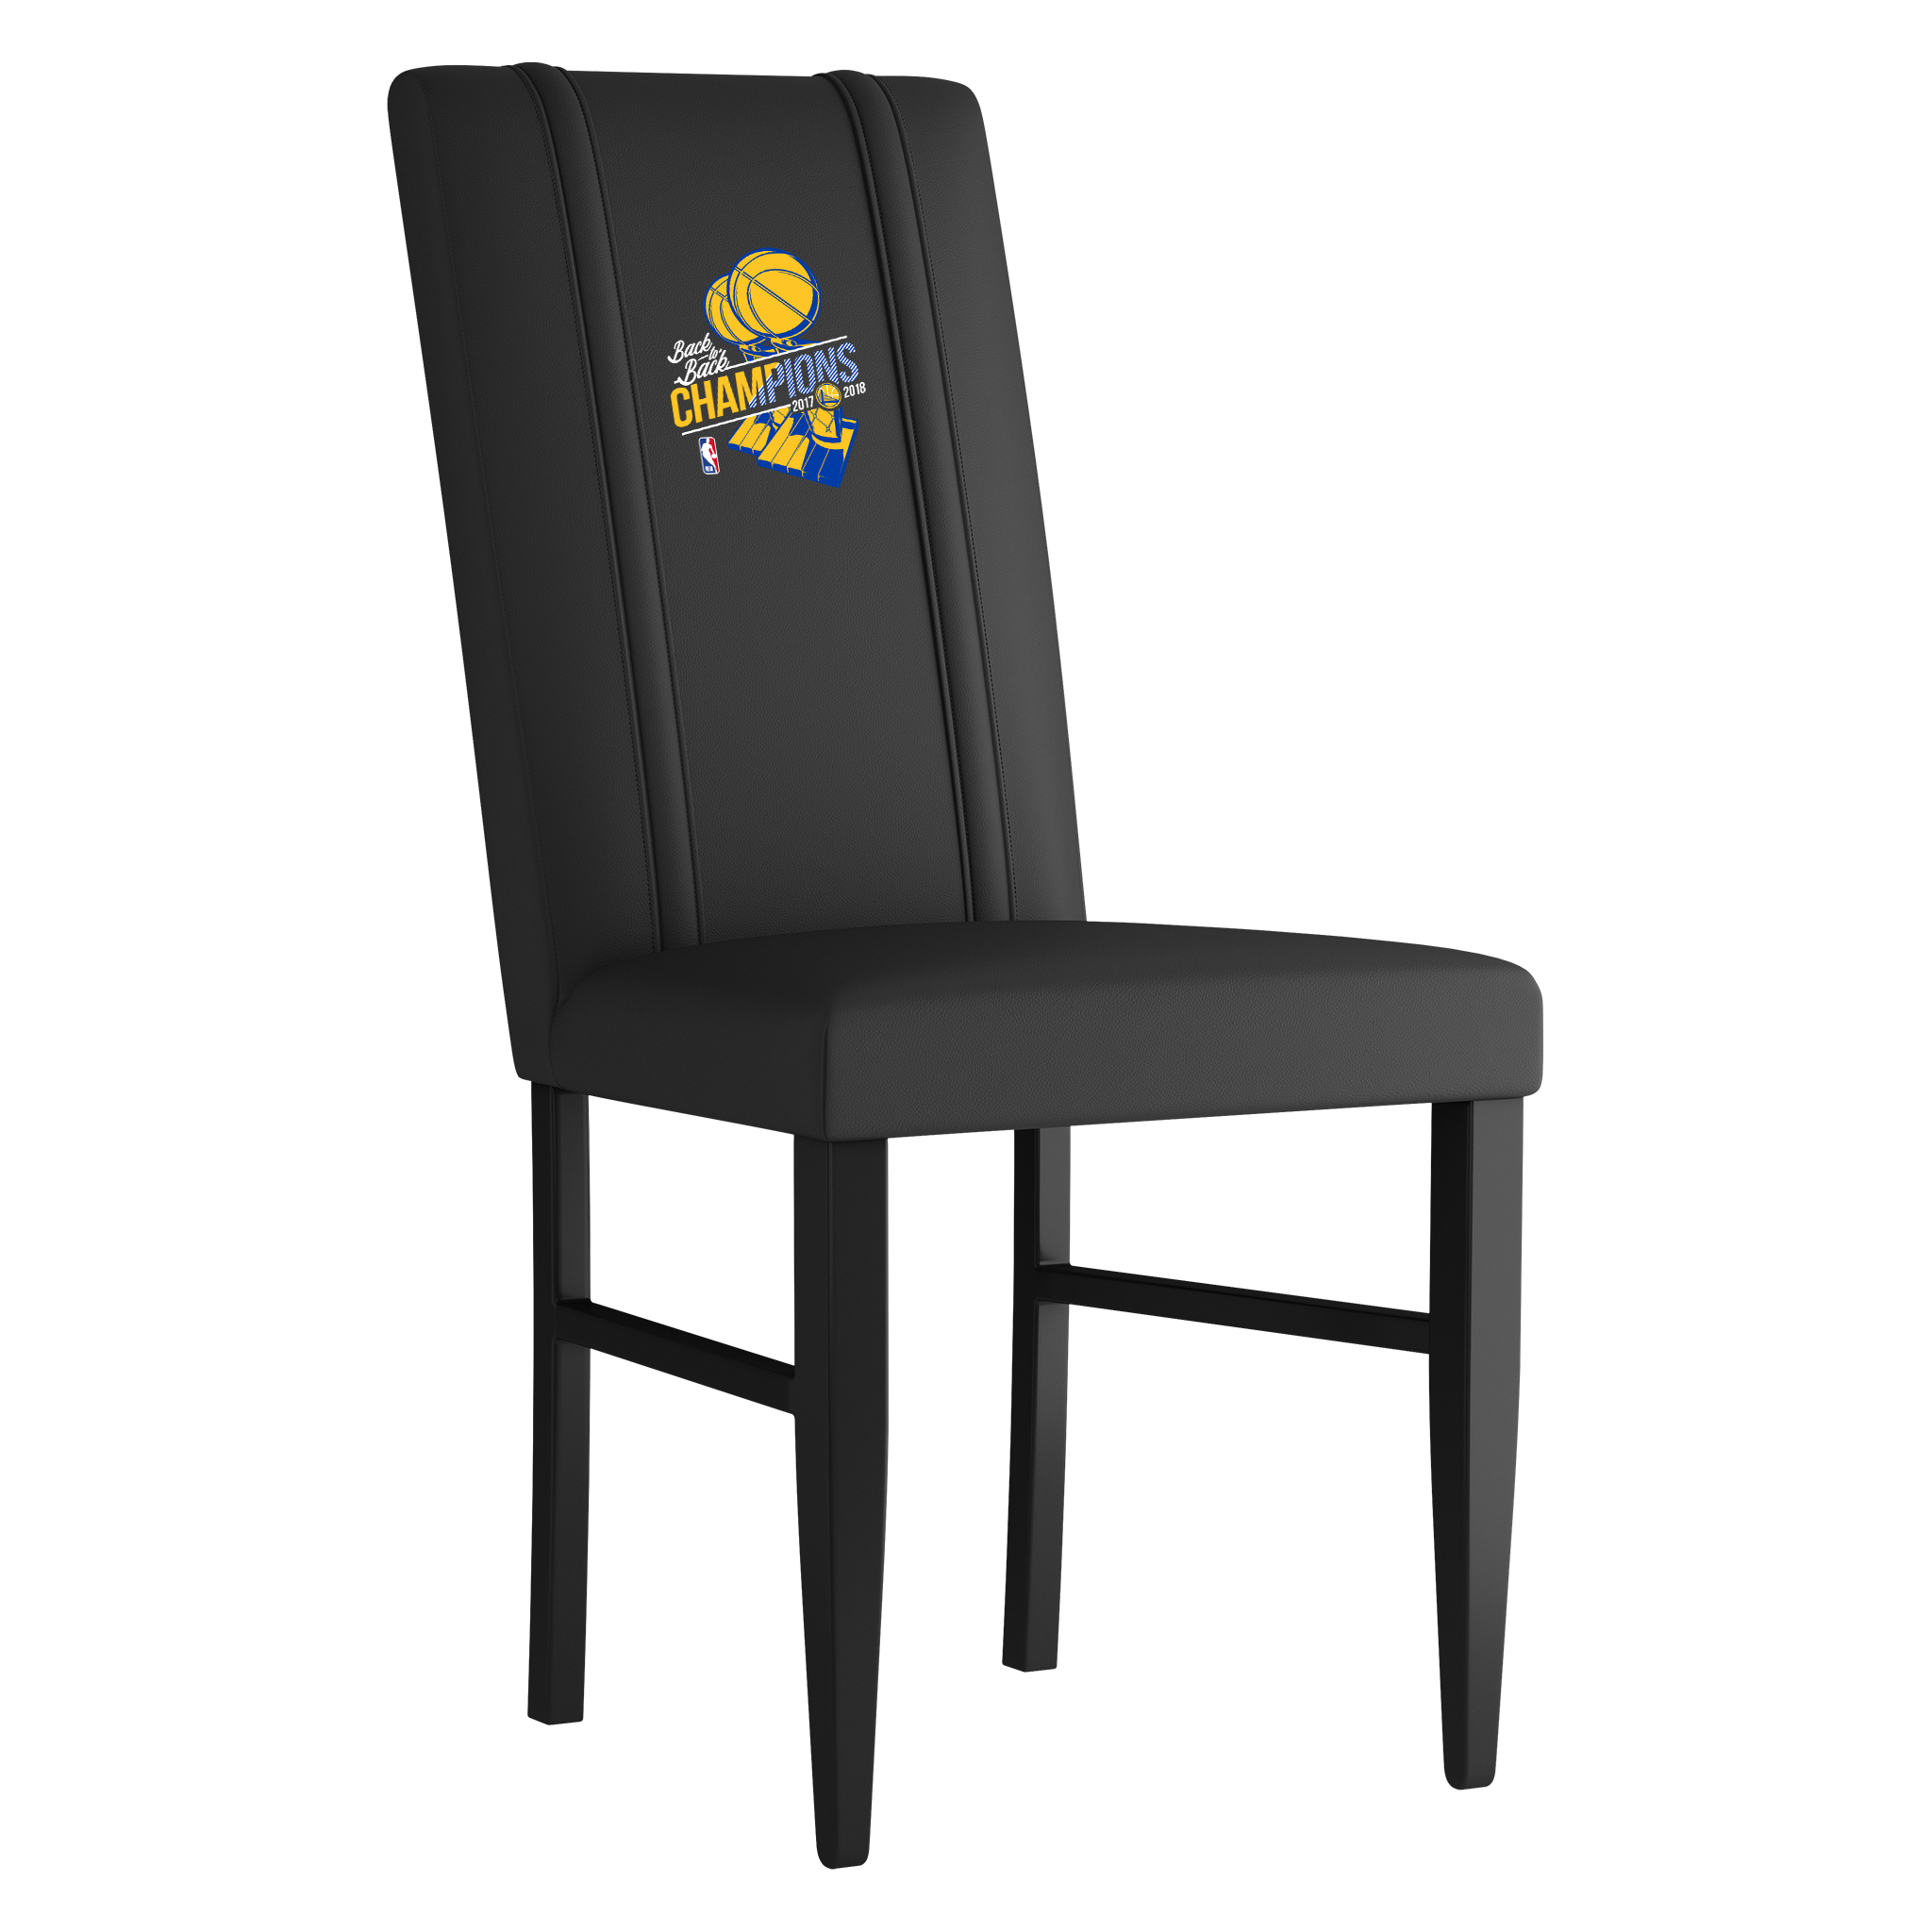 Golden State Warriors Side Chair 2000 With Golden State Warriors 2018 Champions Logo Panel